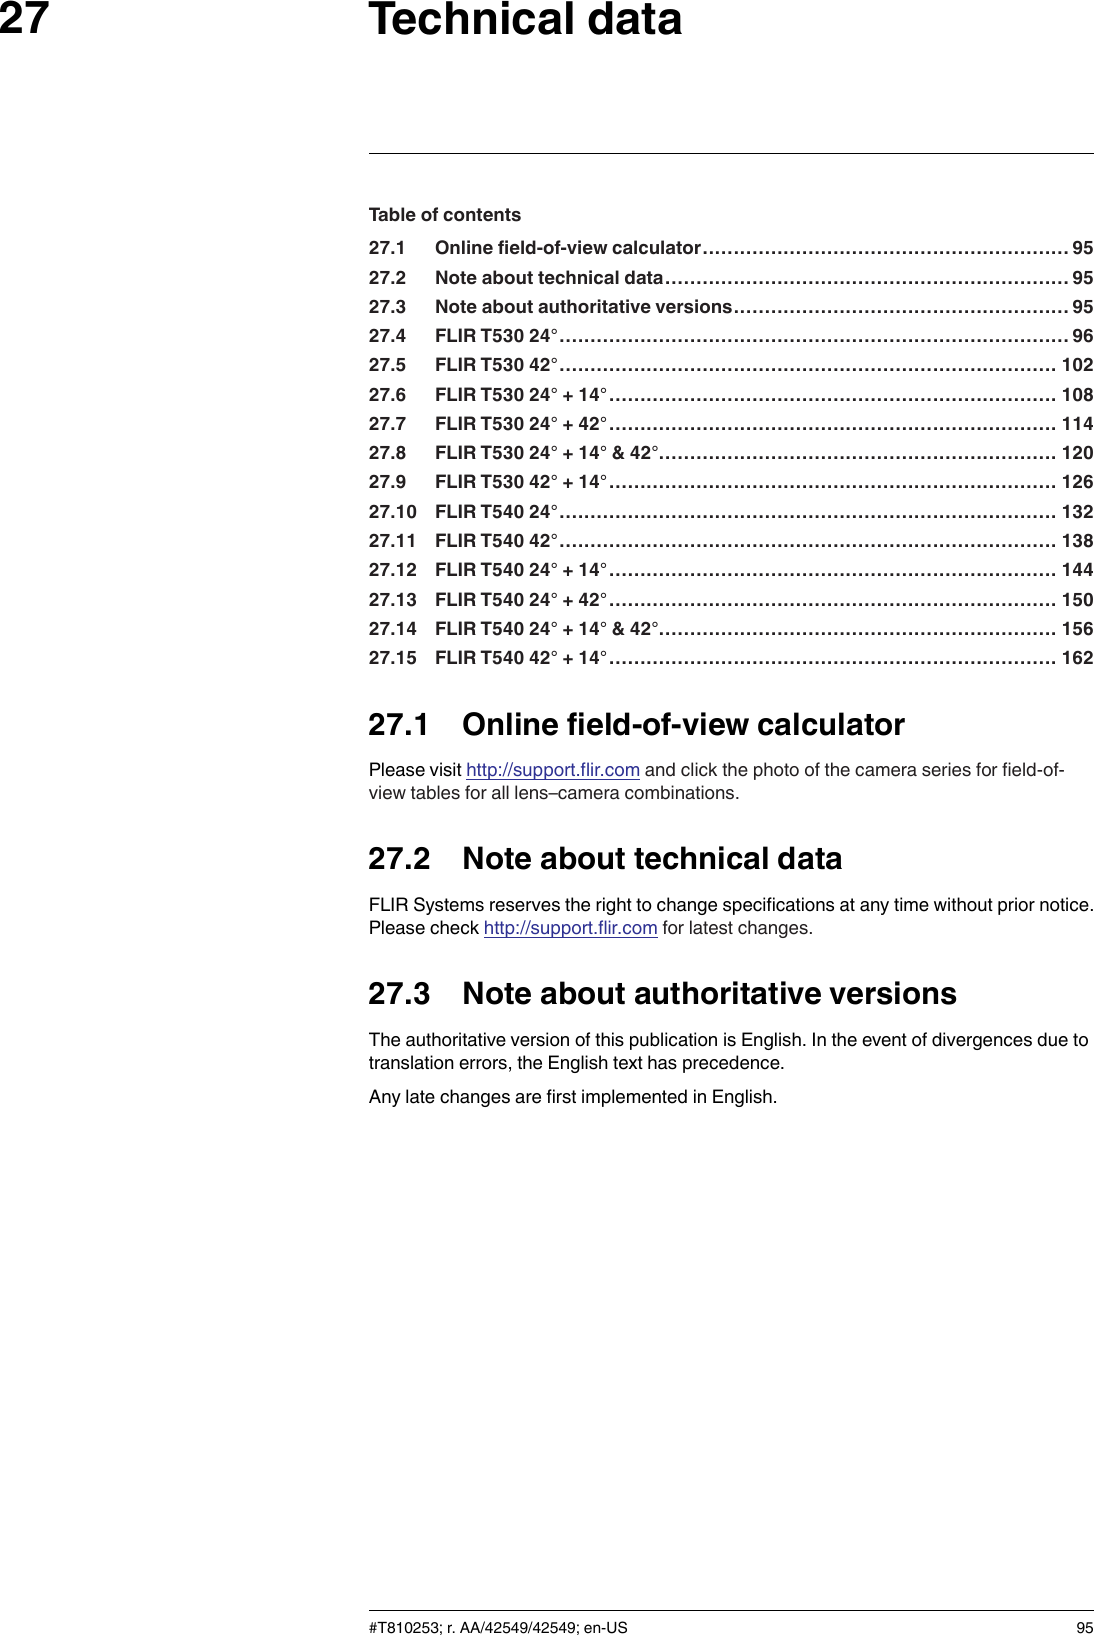 Technical data27Table of contents27.1 Online field-of-view calculator........................................................... 9527.2 Note about technical data................................................................. 9527.3 Note about authoritative versions...................................................... 9527.4 FLIR T530 24°..................................................................................9627.5 FLIR T530 42°................................................................................ 10227.6 FLIR T530 24° + 14°........................................................................ 10827.7 FLIR T530 24° + 42°........................................................................ 11427.8 FLIR T530 24° + 14° &amp; 42°................................................................ 12027.9 FLIR T530 42° + 14°........................................................................ 12627.10 FLIR T540 24°................................................................................ 13227.11 FLIR T540 42°................................................................................ 13827.12 FLIR T540 24° + 14°........................................................................ 14427.13 FLIR T540 24° + 42°........................................................................ 15027.14 FLIR T540 24° + 14° &amp; 42°................................................................ 15627.15 FLIR T540 42° + 14°........................................................................ 16227.1 Online field-of-view calculatorPlease visit http://support.flir.com and click the photo of the camera series for field-of-view tables for all lens–camera combinations.27.2 Note about technical dataFLIR Systems reserves the right to change specifications at any time without prior notice.Please check http://support.flir.com for latest changes.27.3 Note about authoritative versionsThe authoritative version of this publication is English. In the event of divergences due totranslation errors, the English text has precedence.Any late changes are first implemented in English.#T810253; r. AA/42549/42549; en-US 95